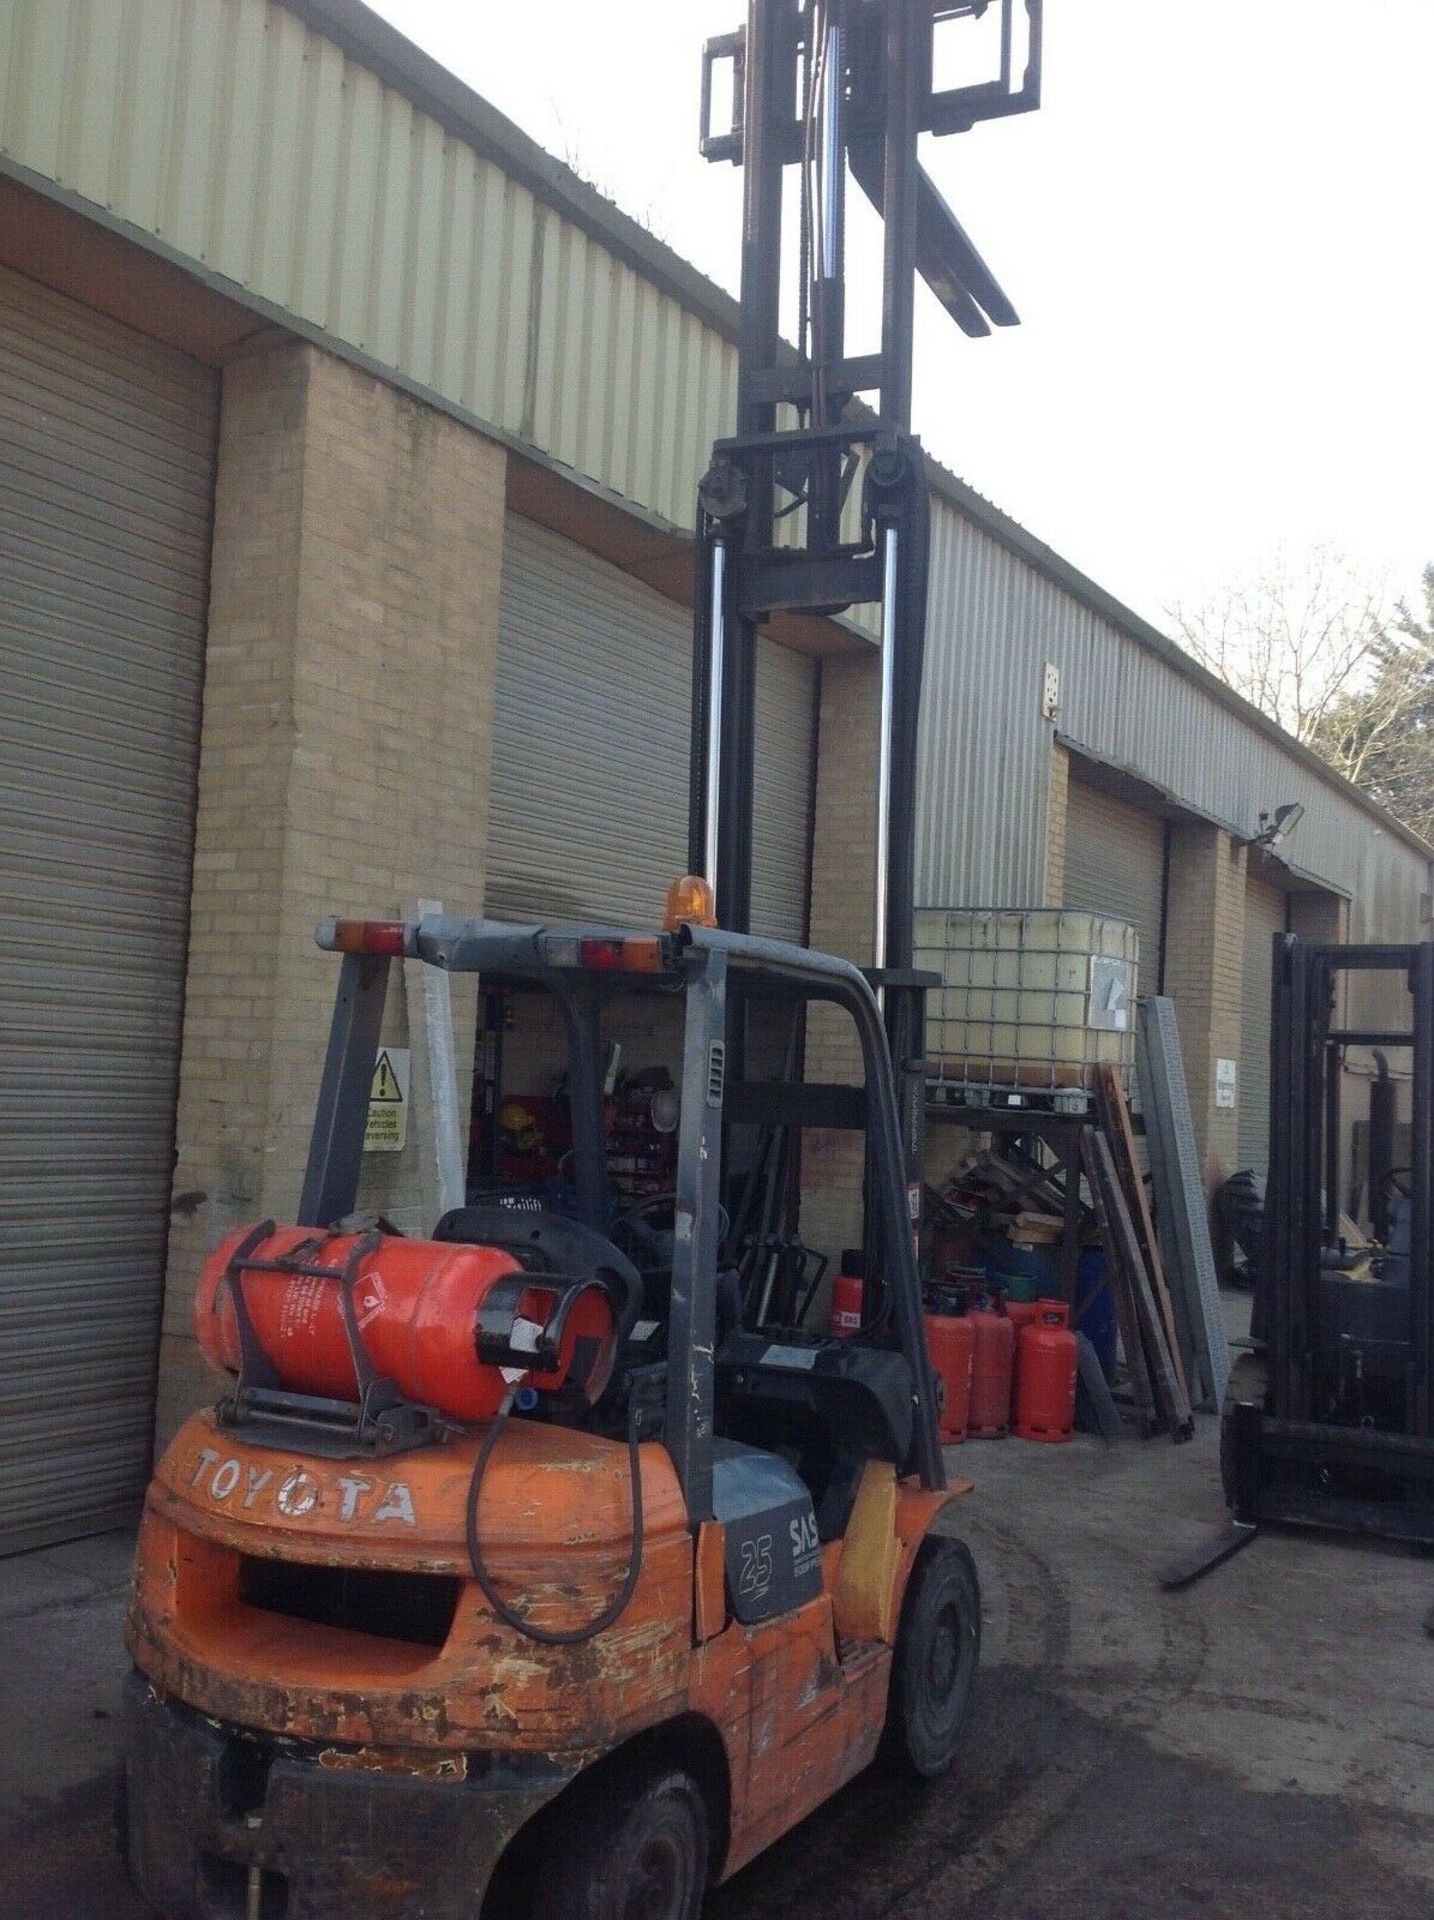 Toyota 2.5 ton gas forklift truck - Image 7 of 8